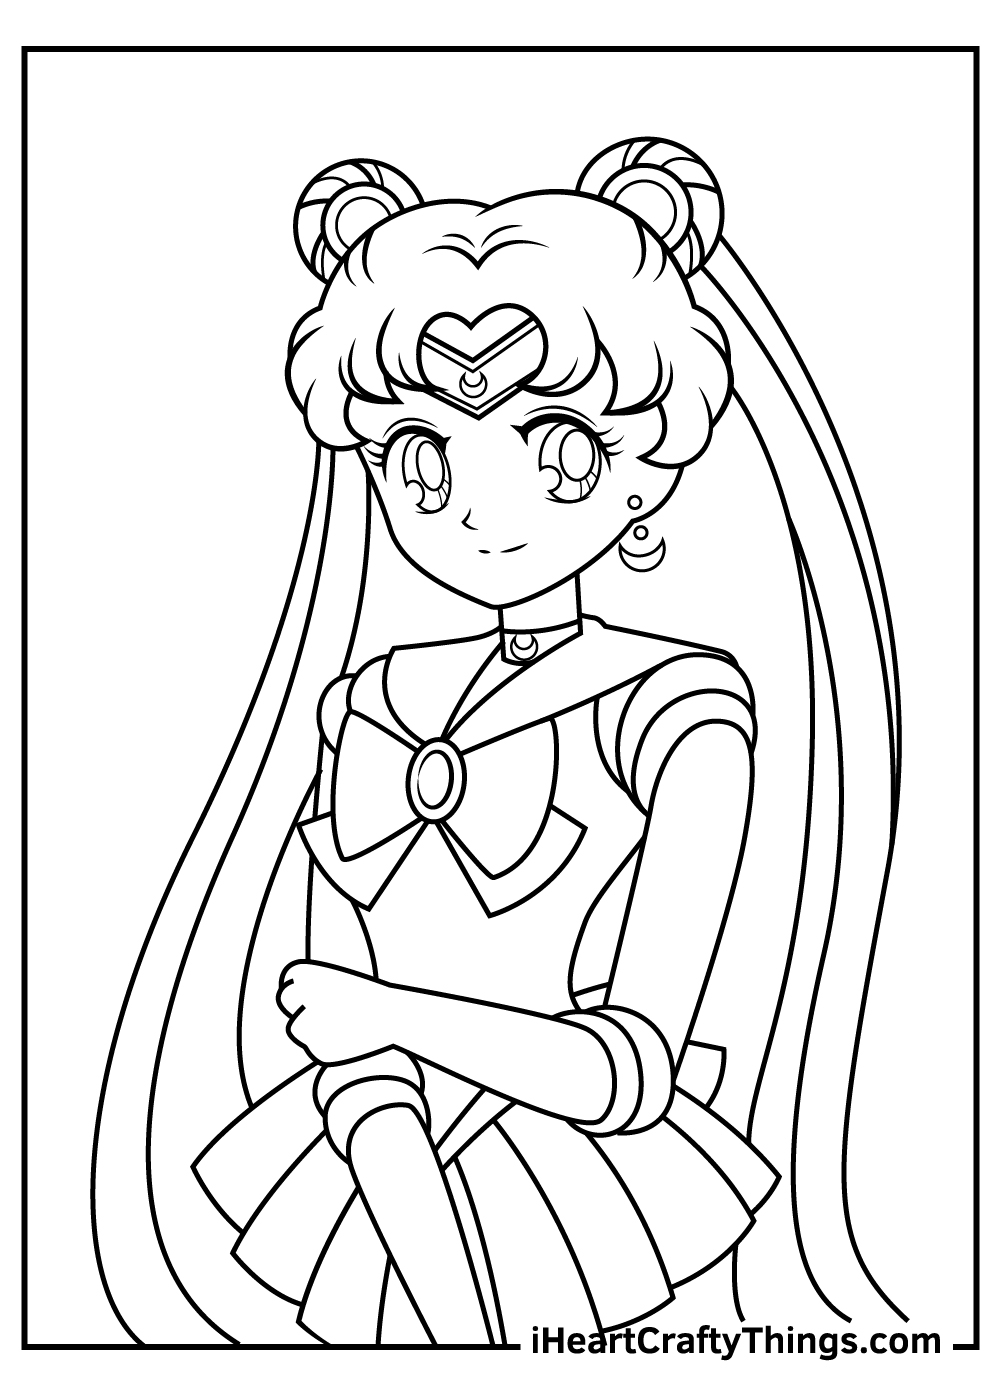 Sailor moon coloring pages free printables